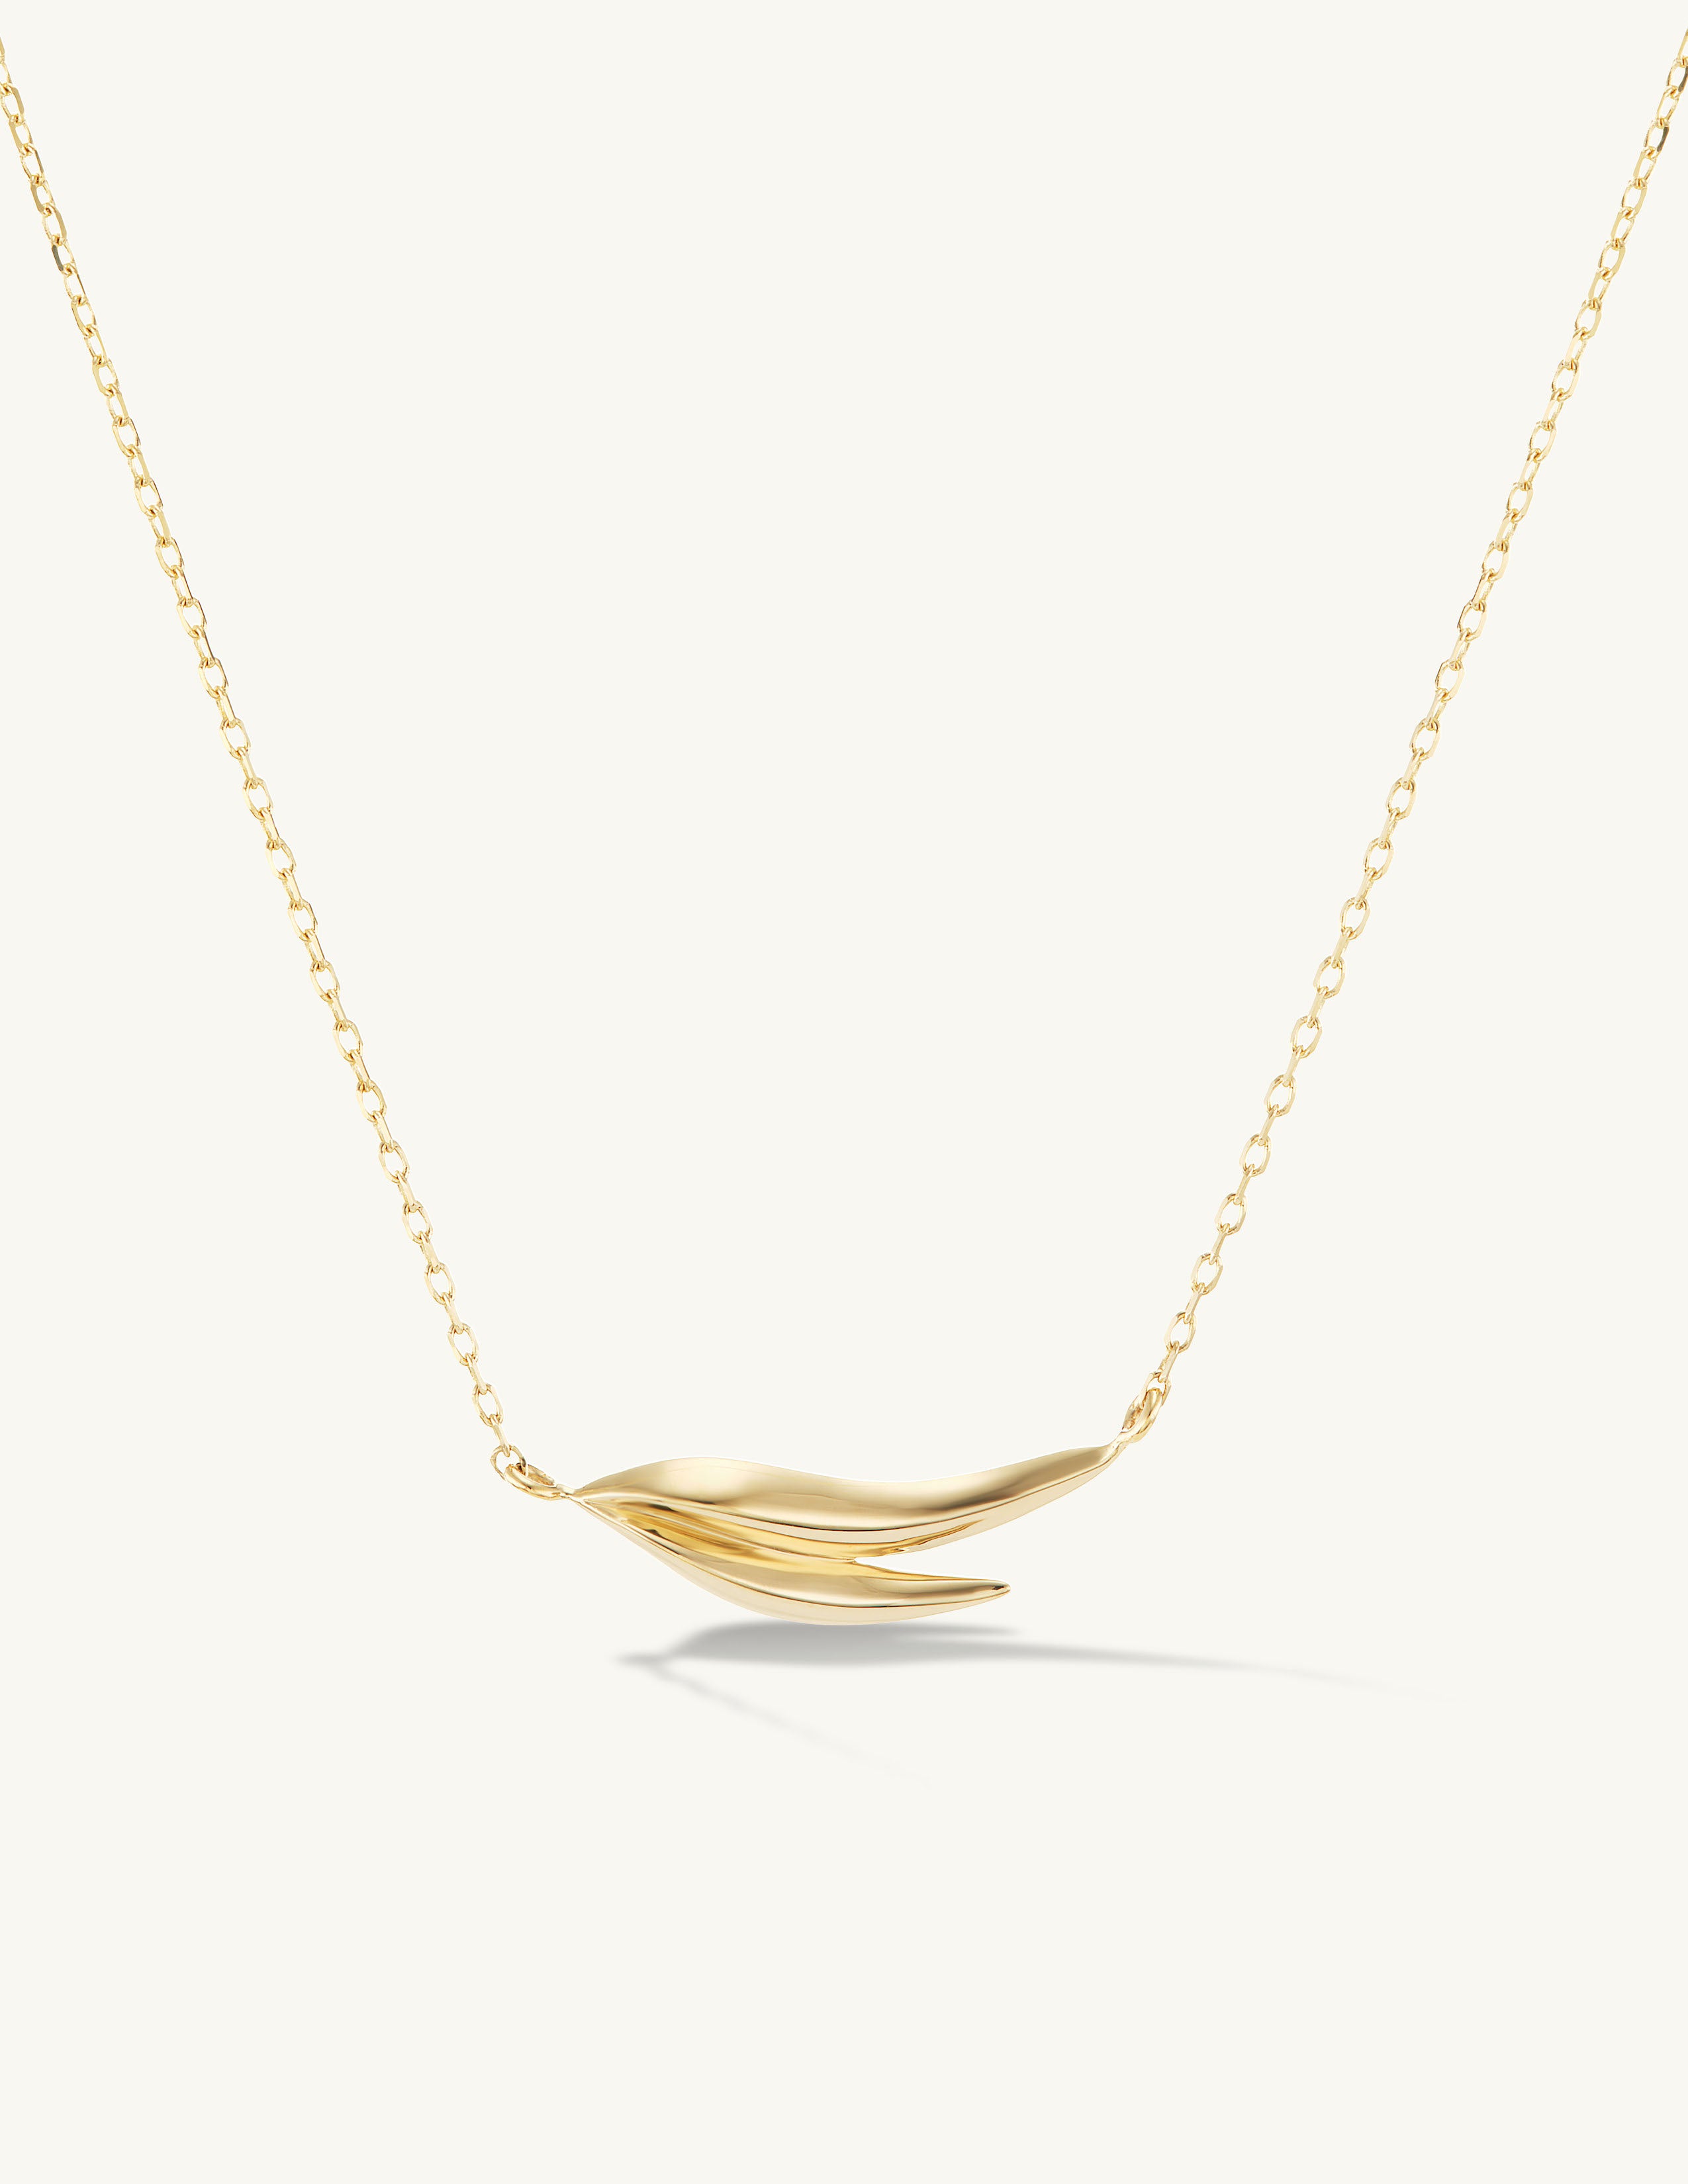 Flame Silhouette Necklace